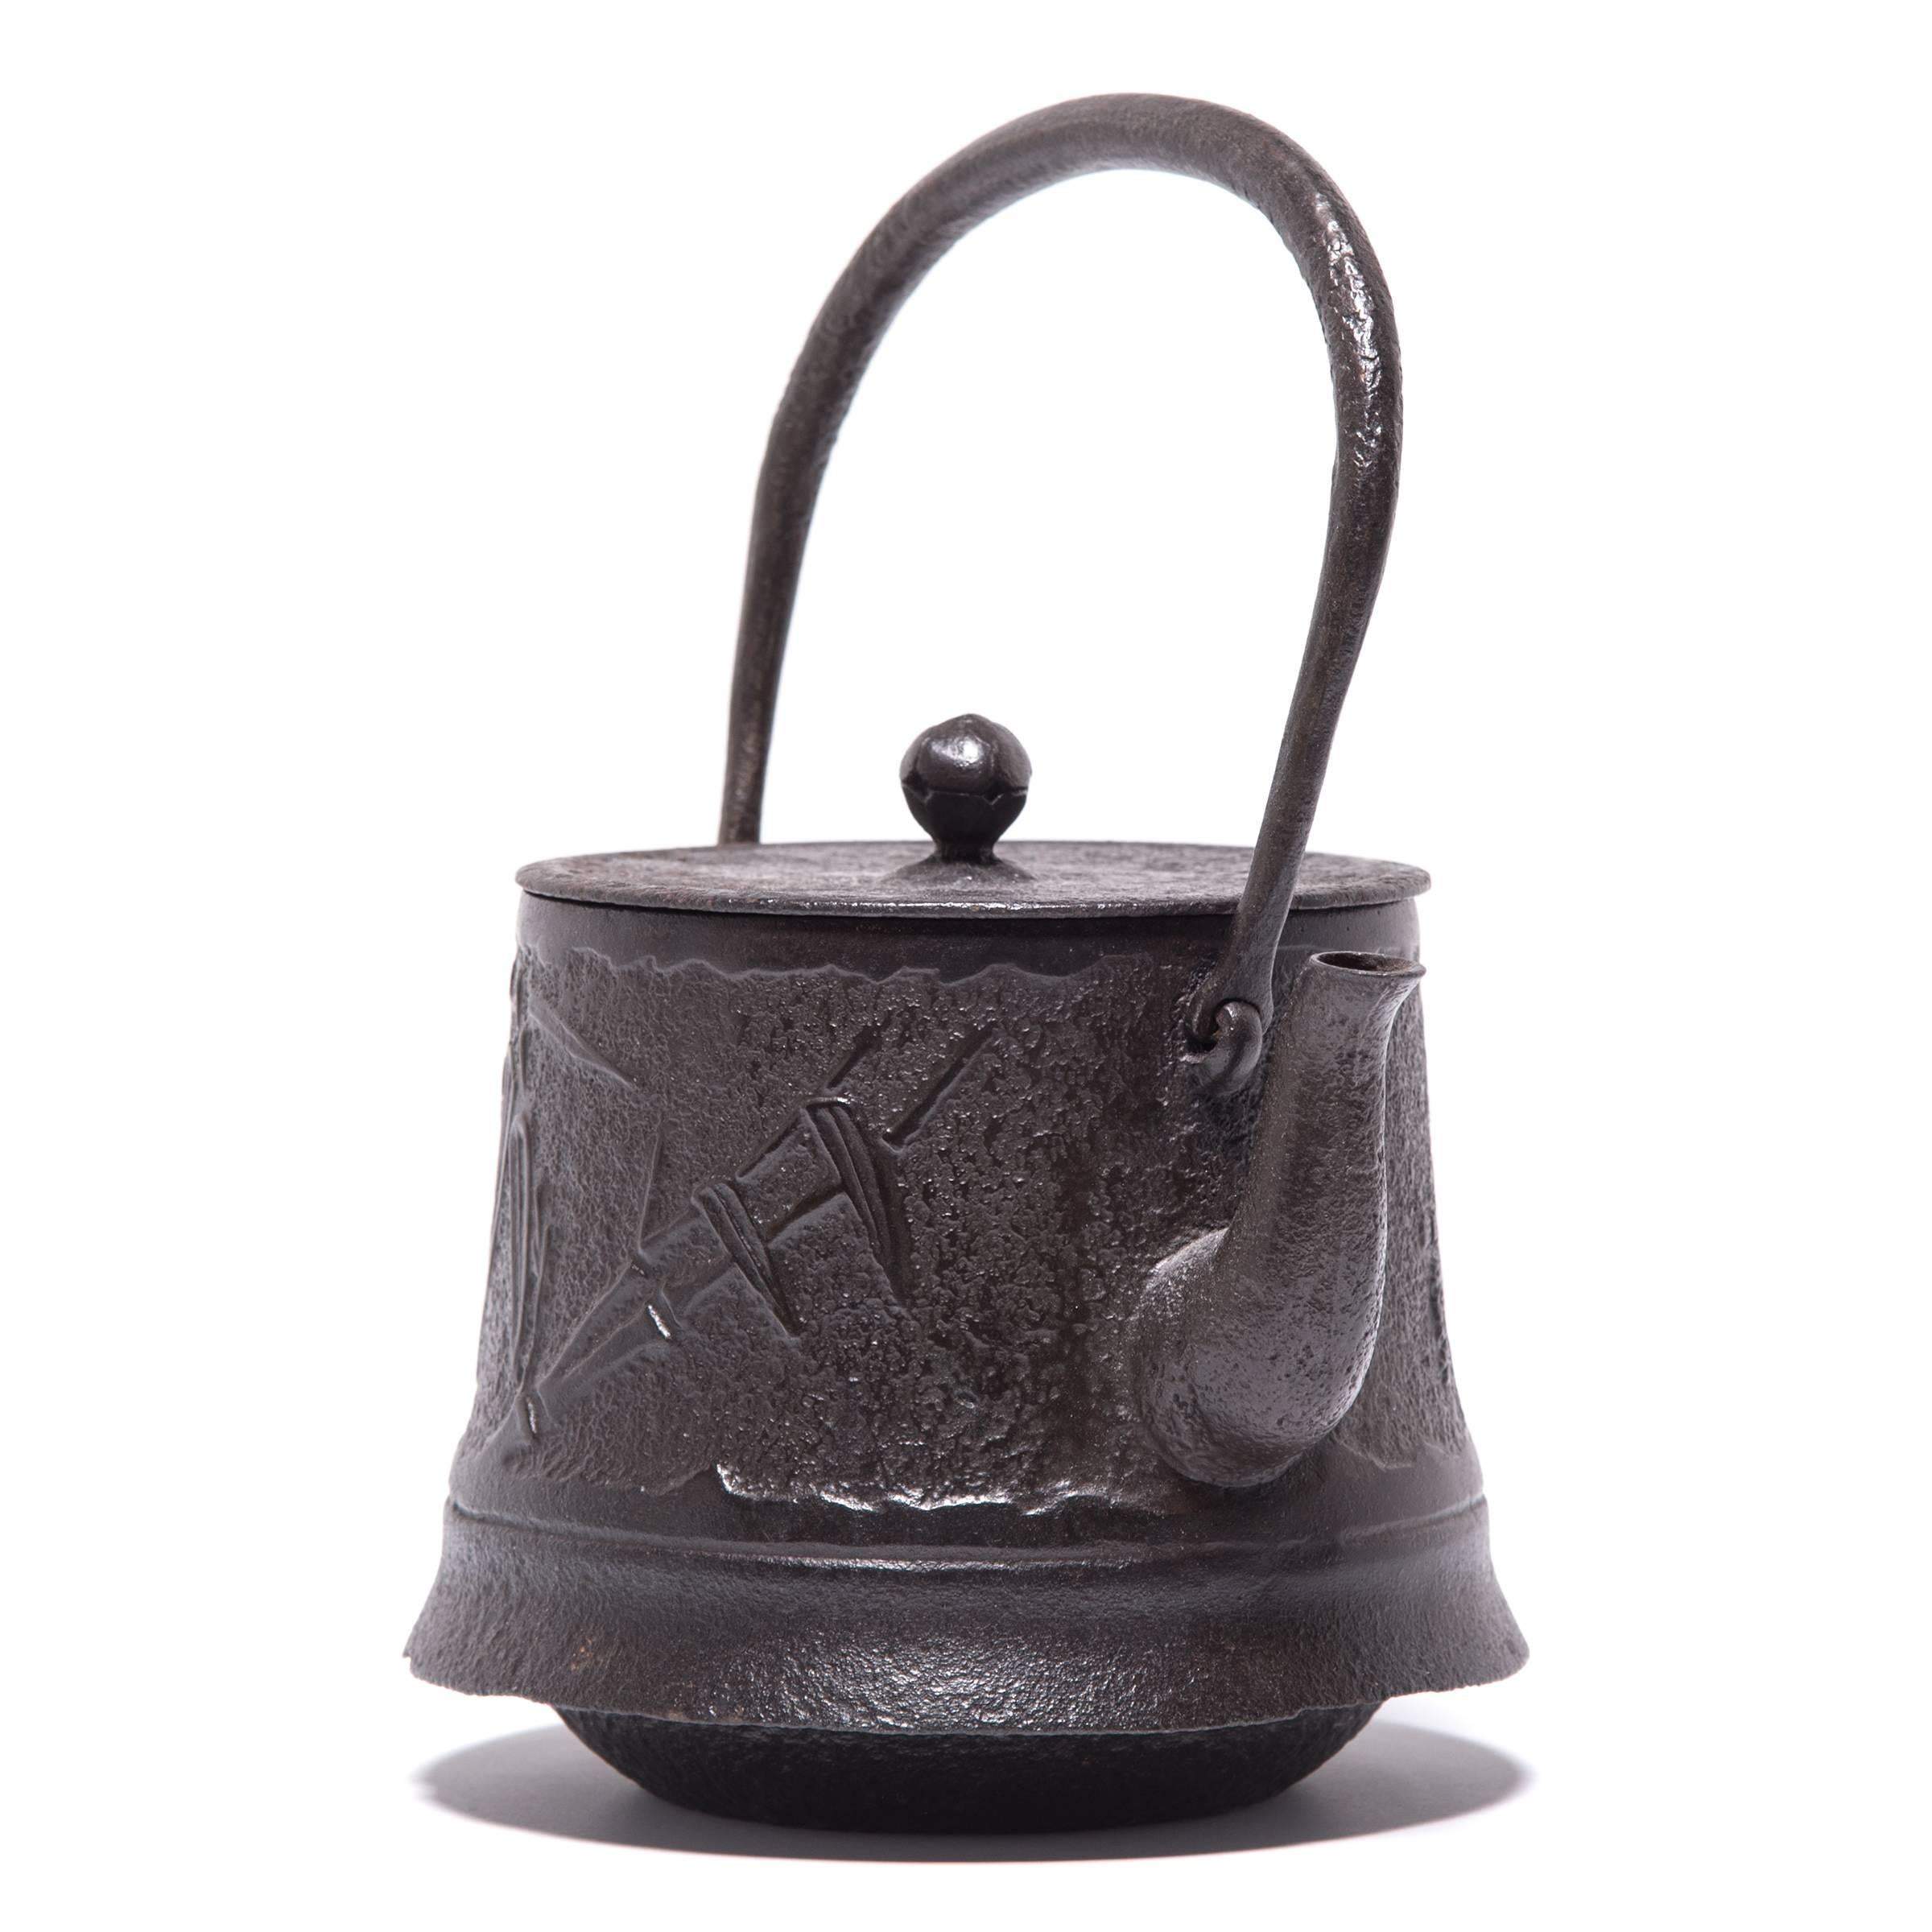 Known as “tetsubin,” cast-iron kettles have been produced in Japan for centuries. Made to boil water for traditional tea ceremonies, the kettle’s cast-iron construction is said to change the quality of the water, making tea taste mellow and sweet.